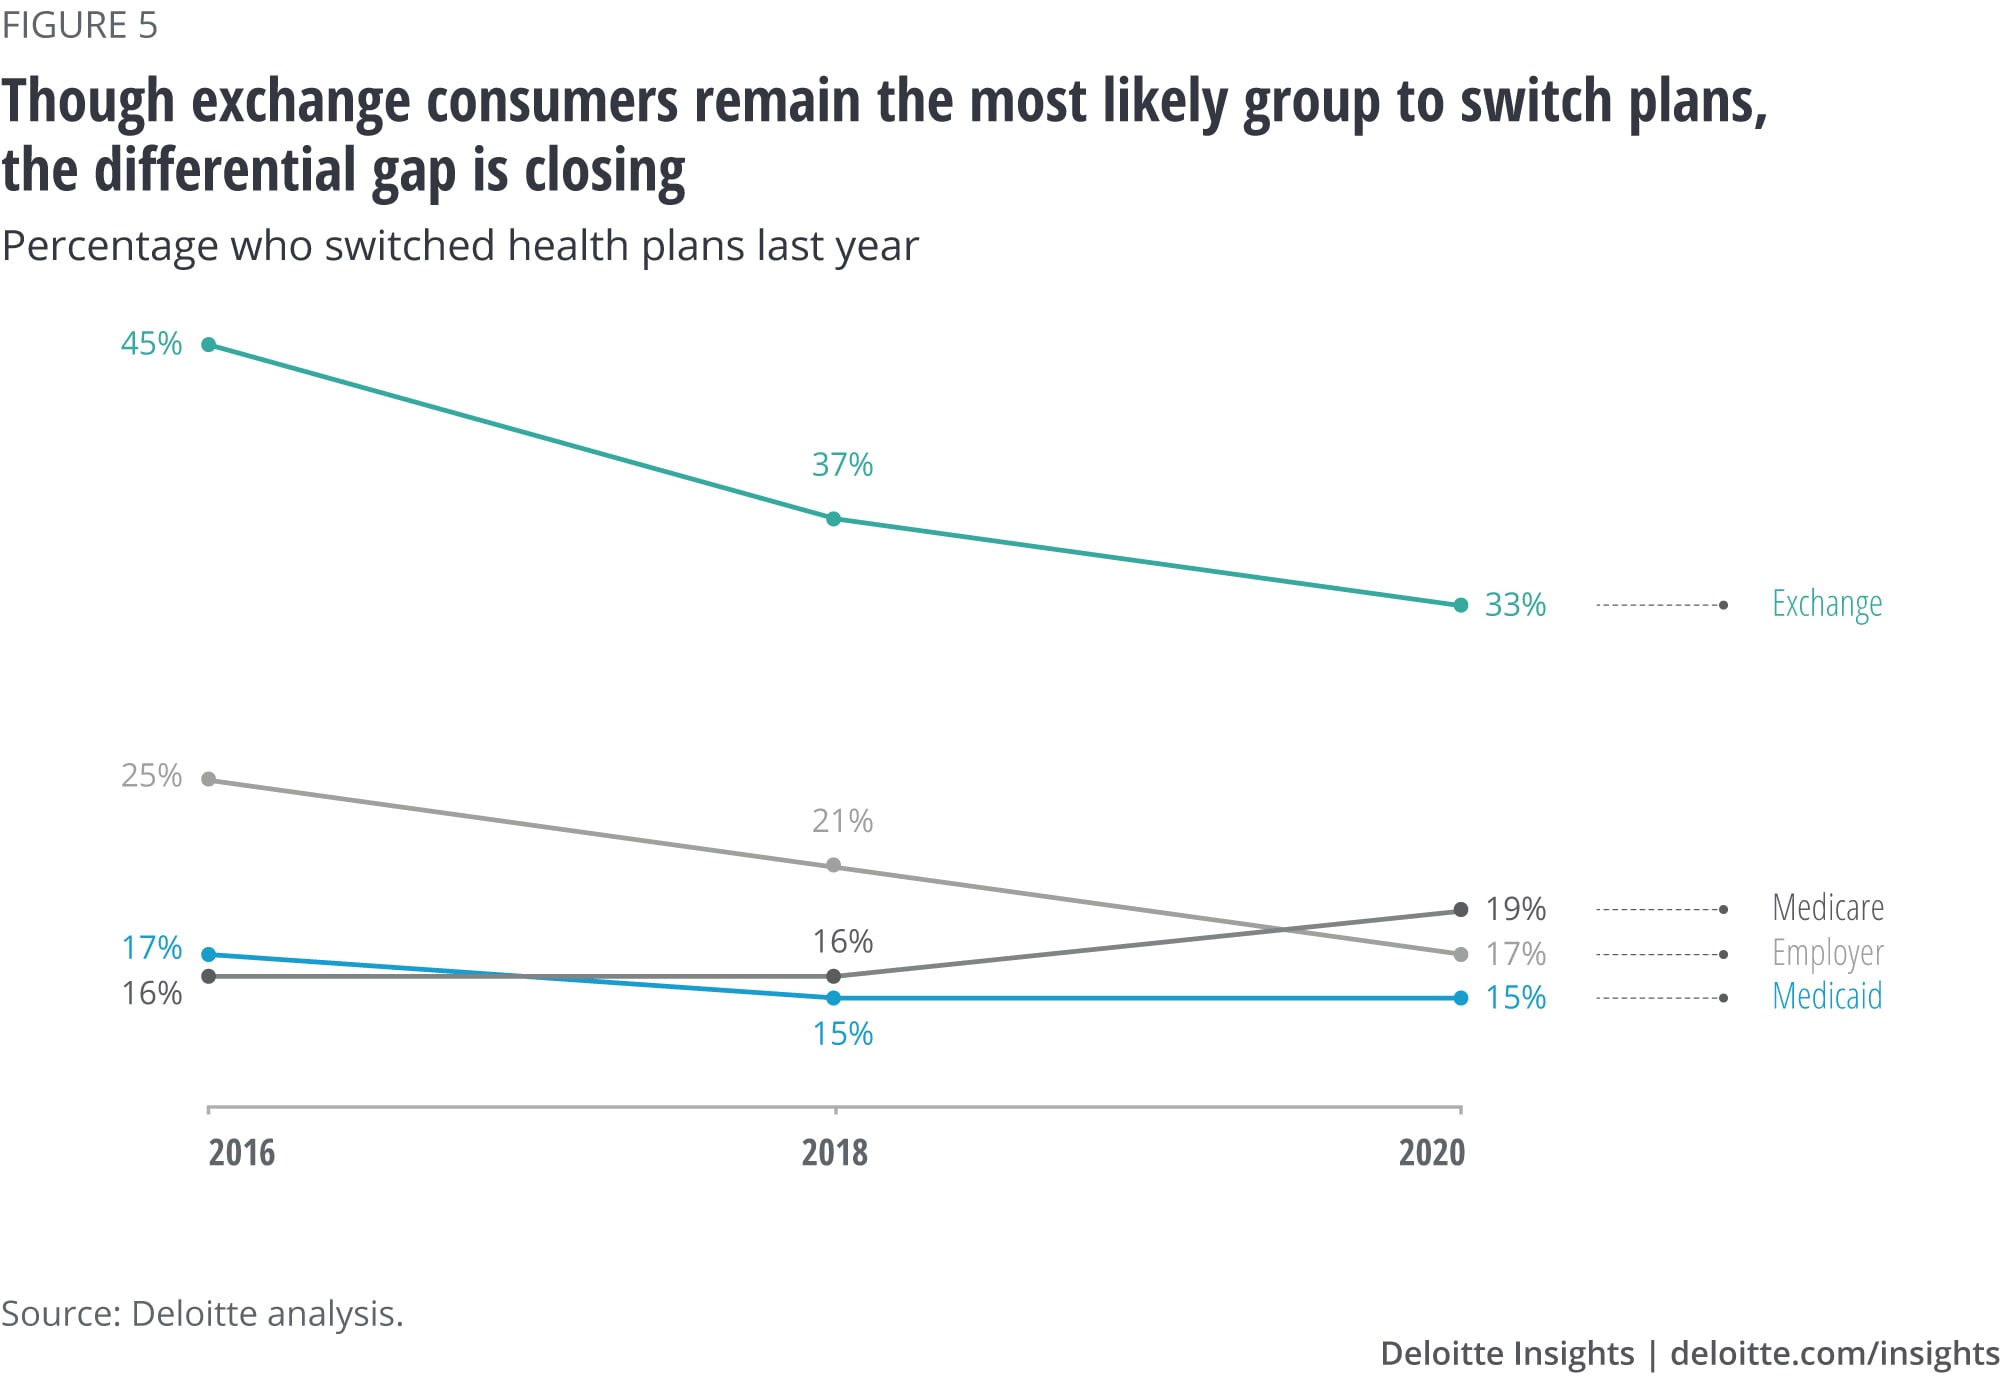 Consumers in exchanges are more likely to switch plans than any other cohort, but the differential gap is closing